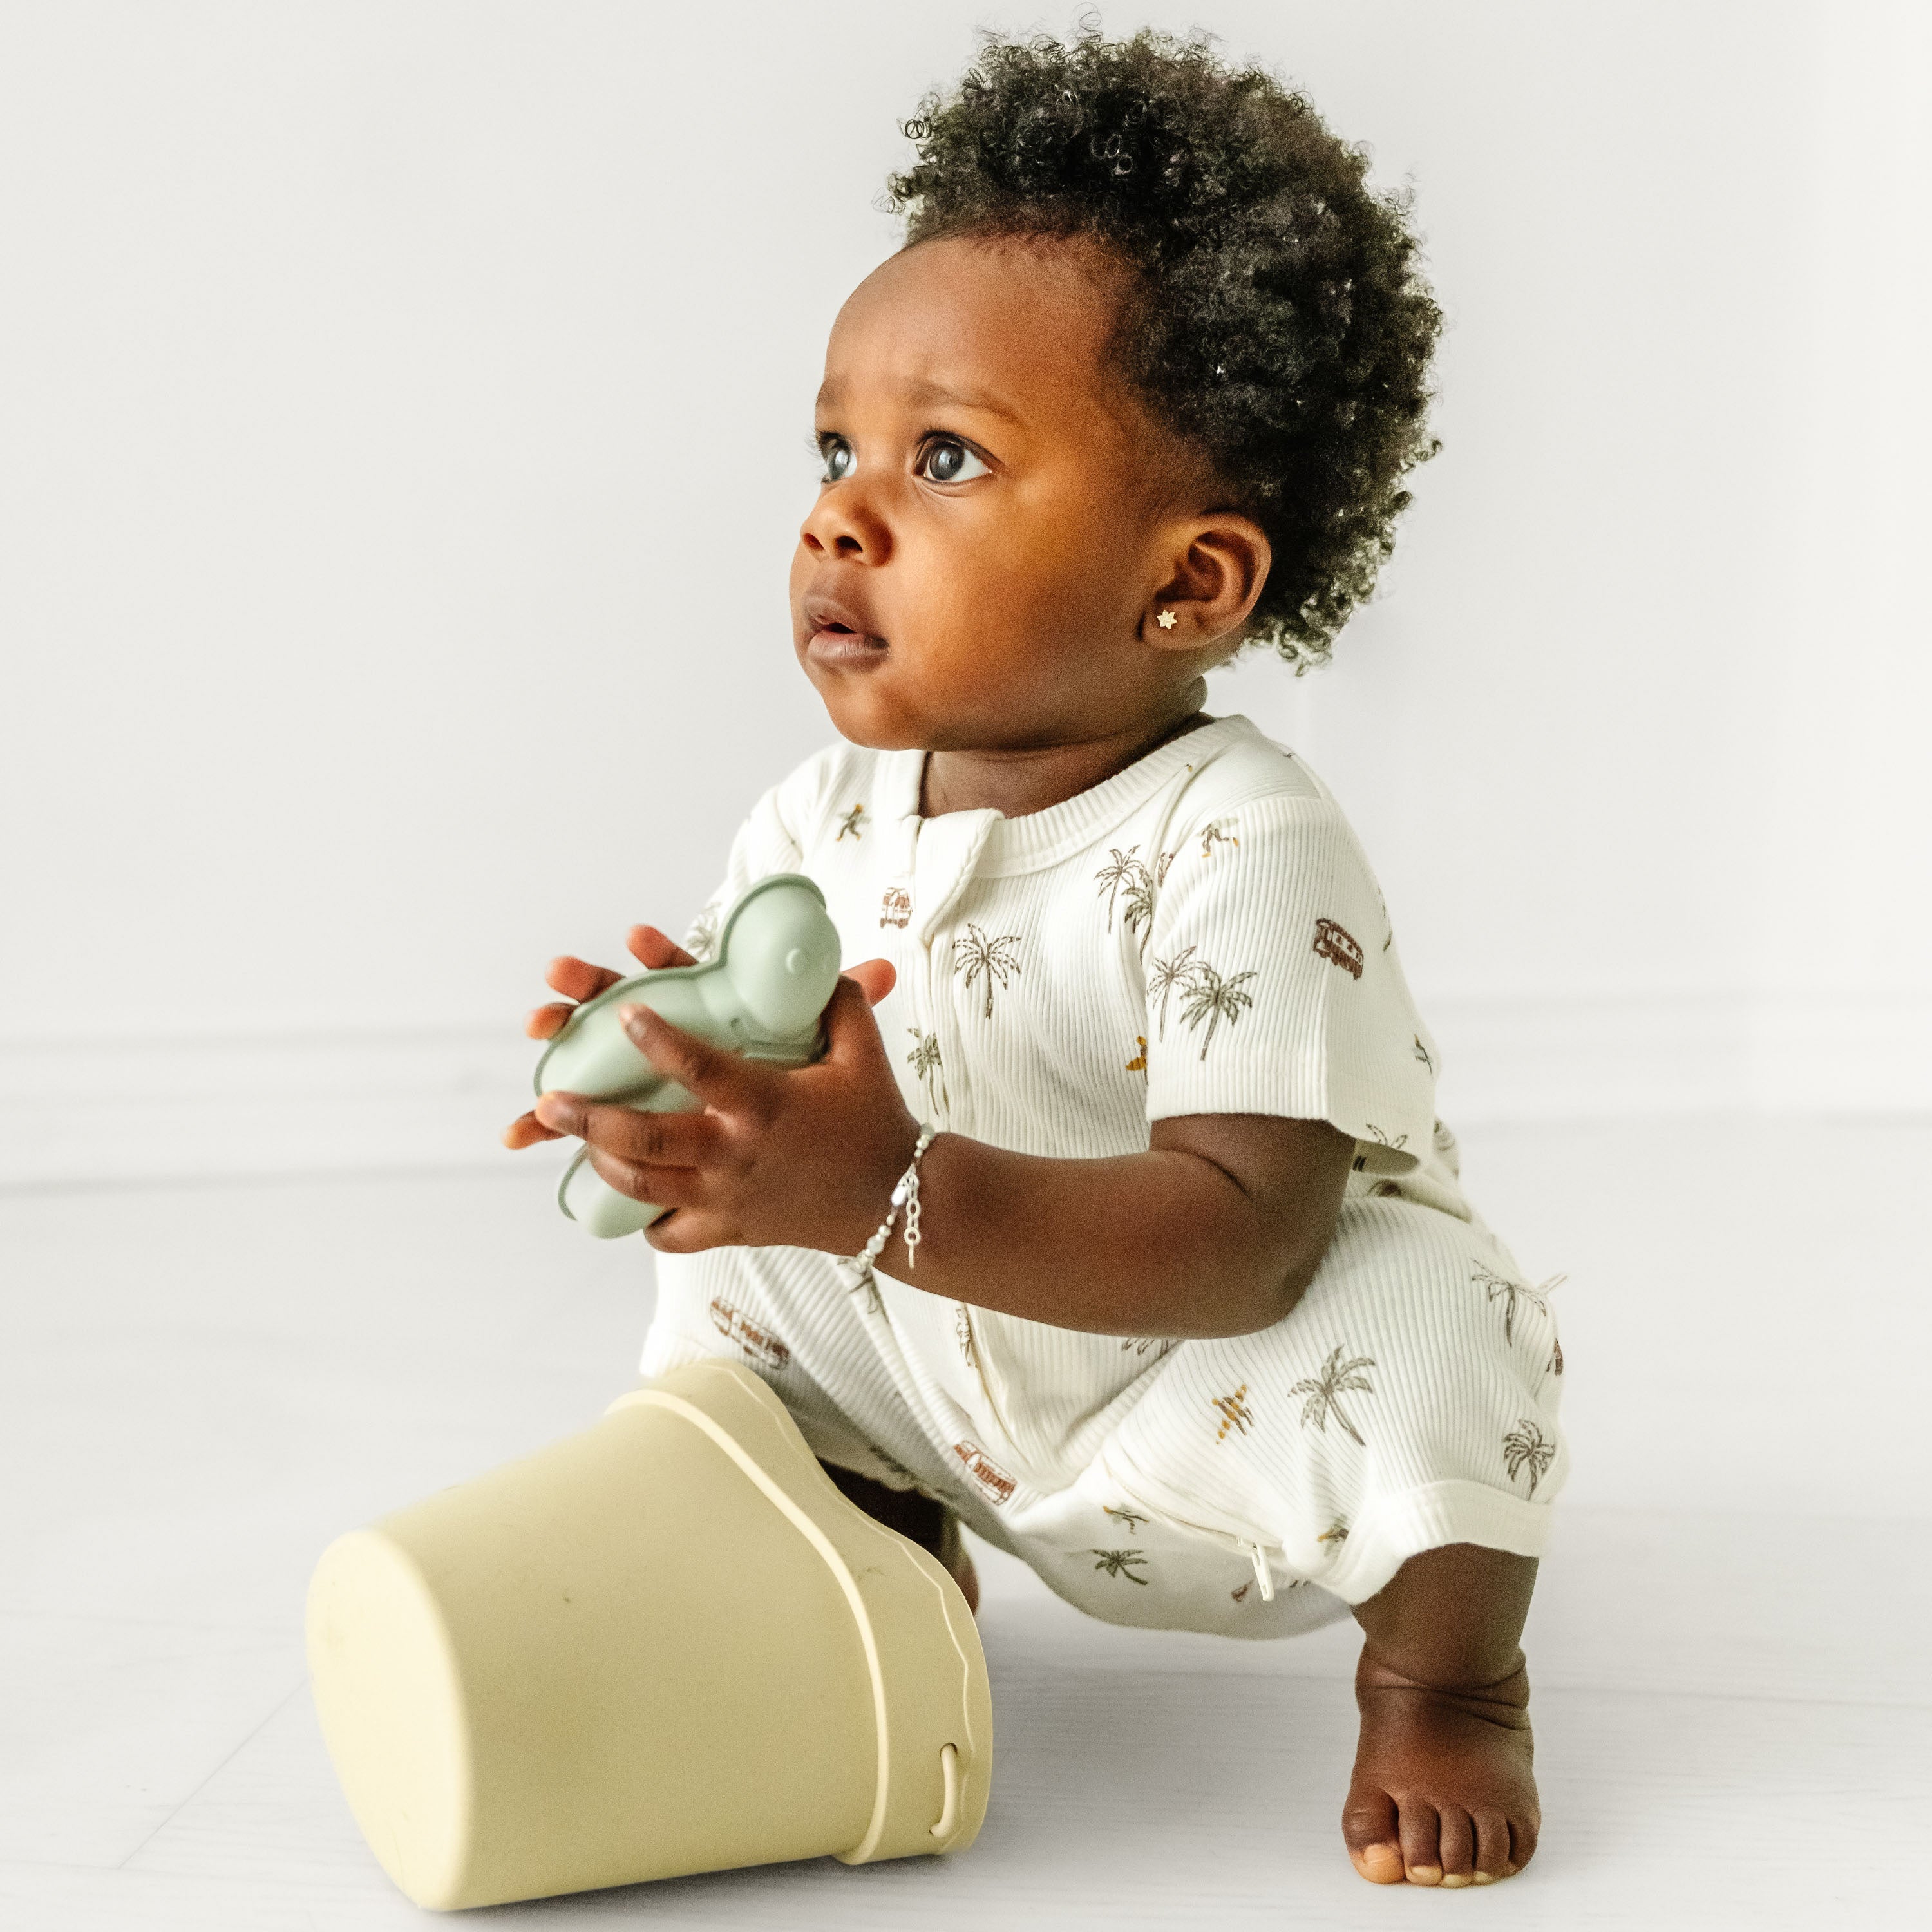 A baby with curly hair, wearing a white Makemake Organics Organic Short Zip Romper with animal prints, holds a toy and sits on a white floor, looking thoughtfully to the side.